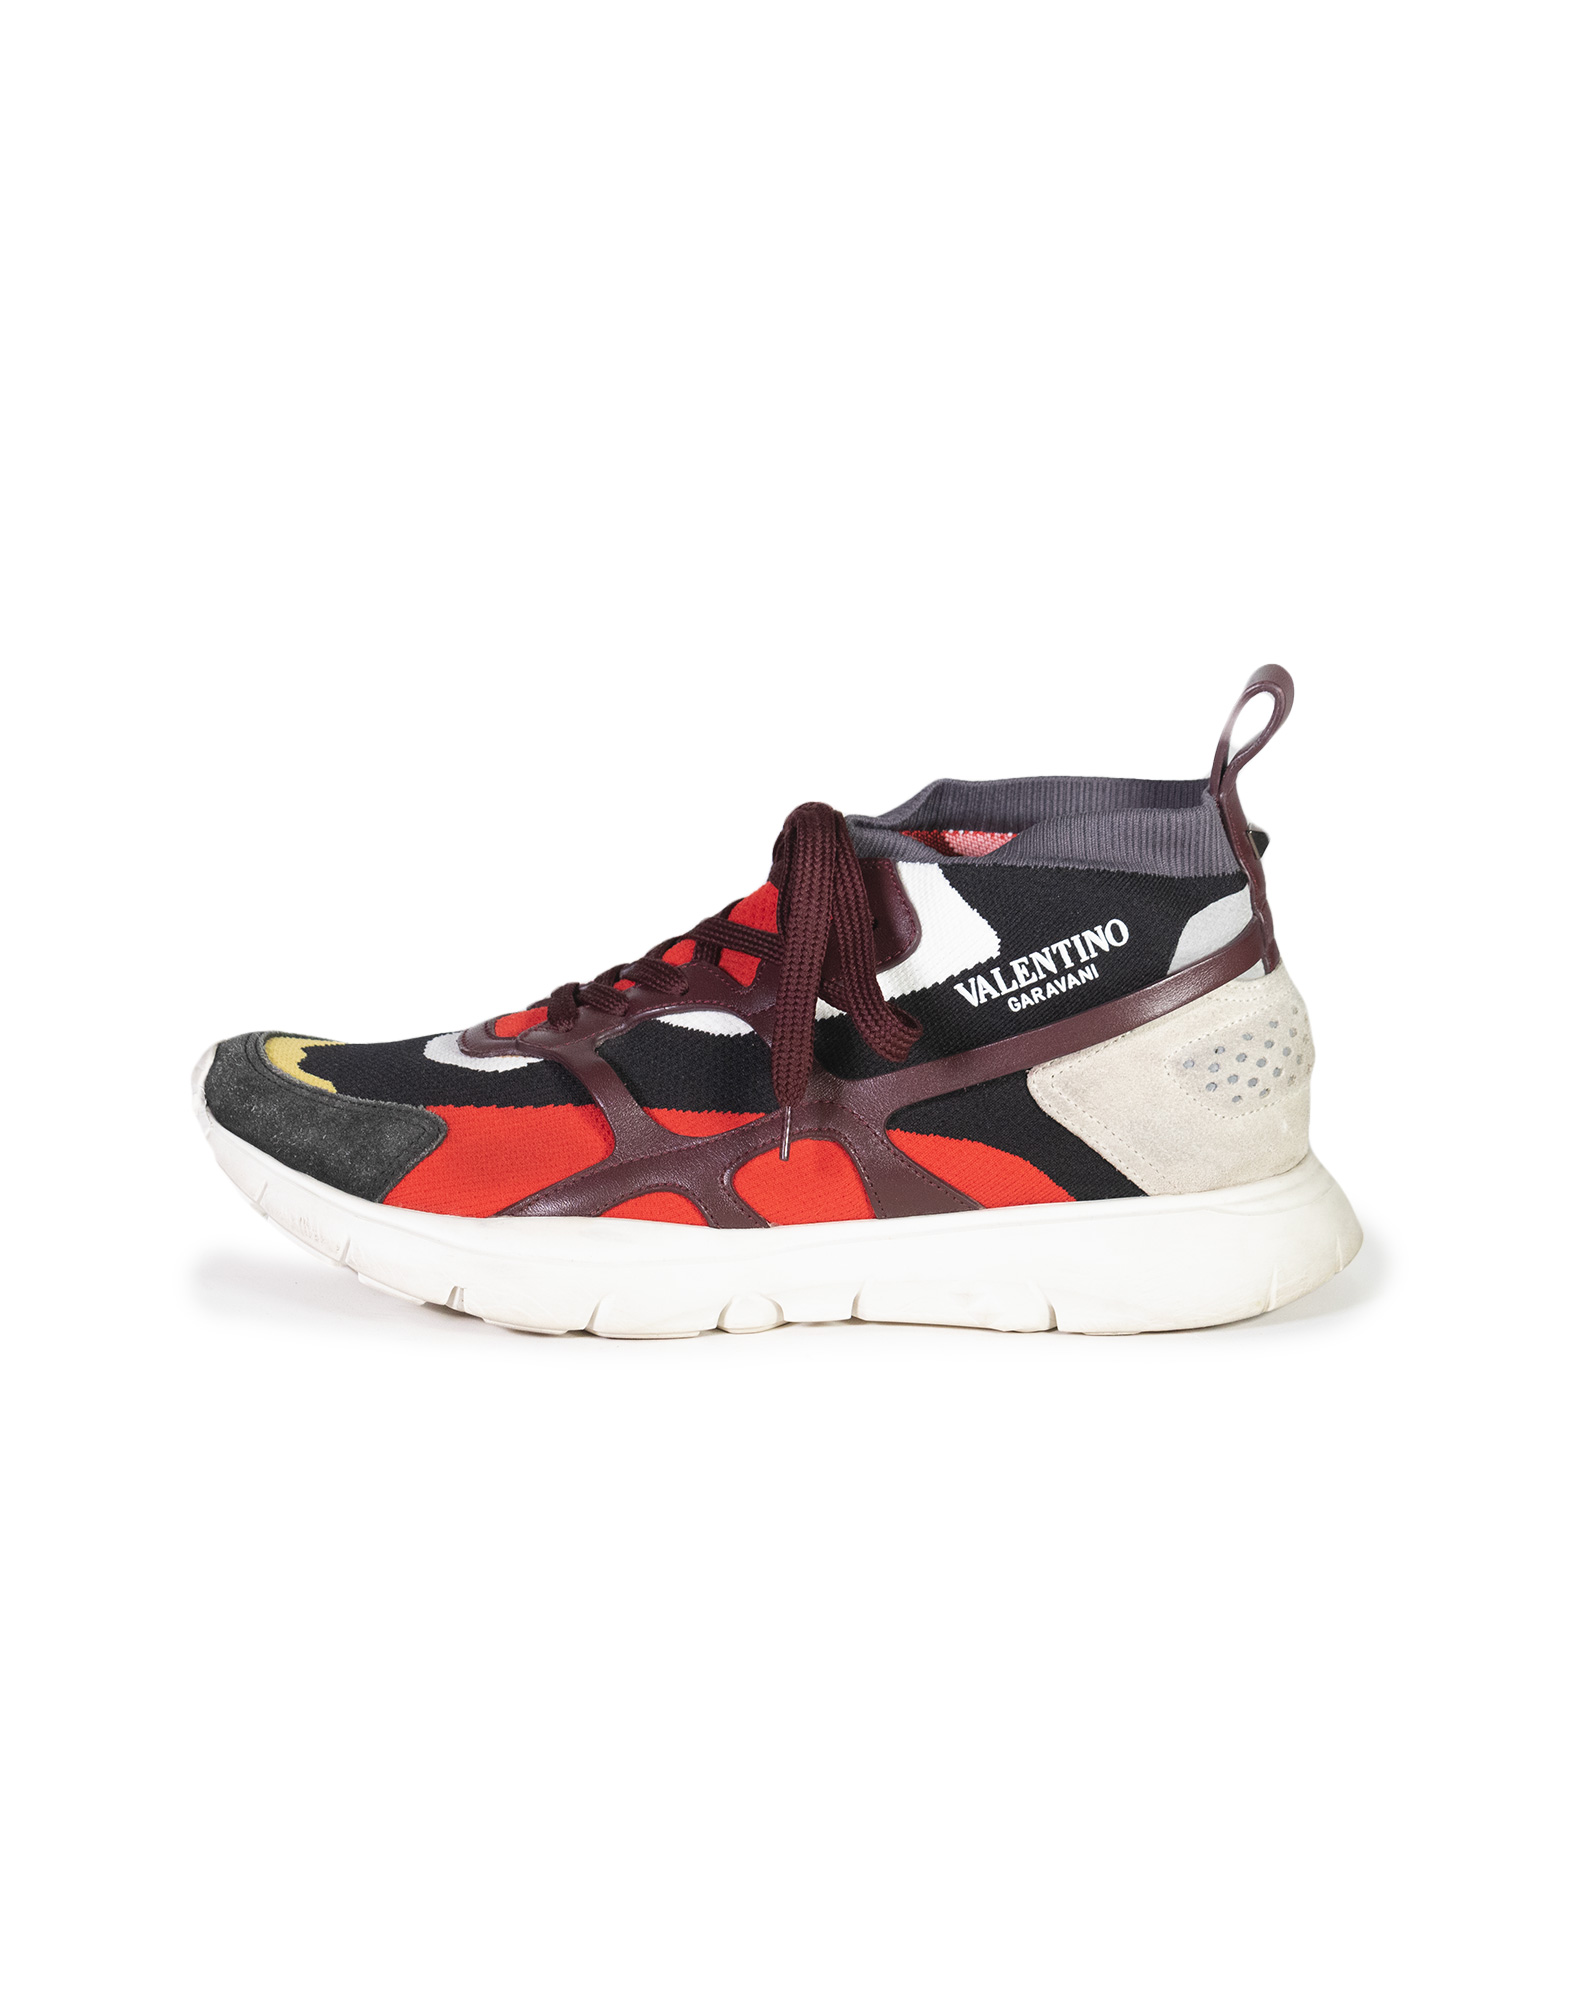 Valentino - 'Sound High' sneakers